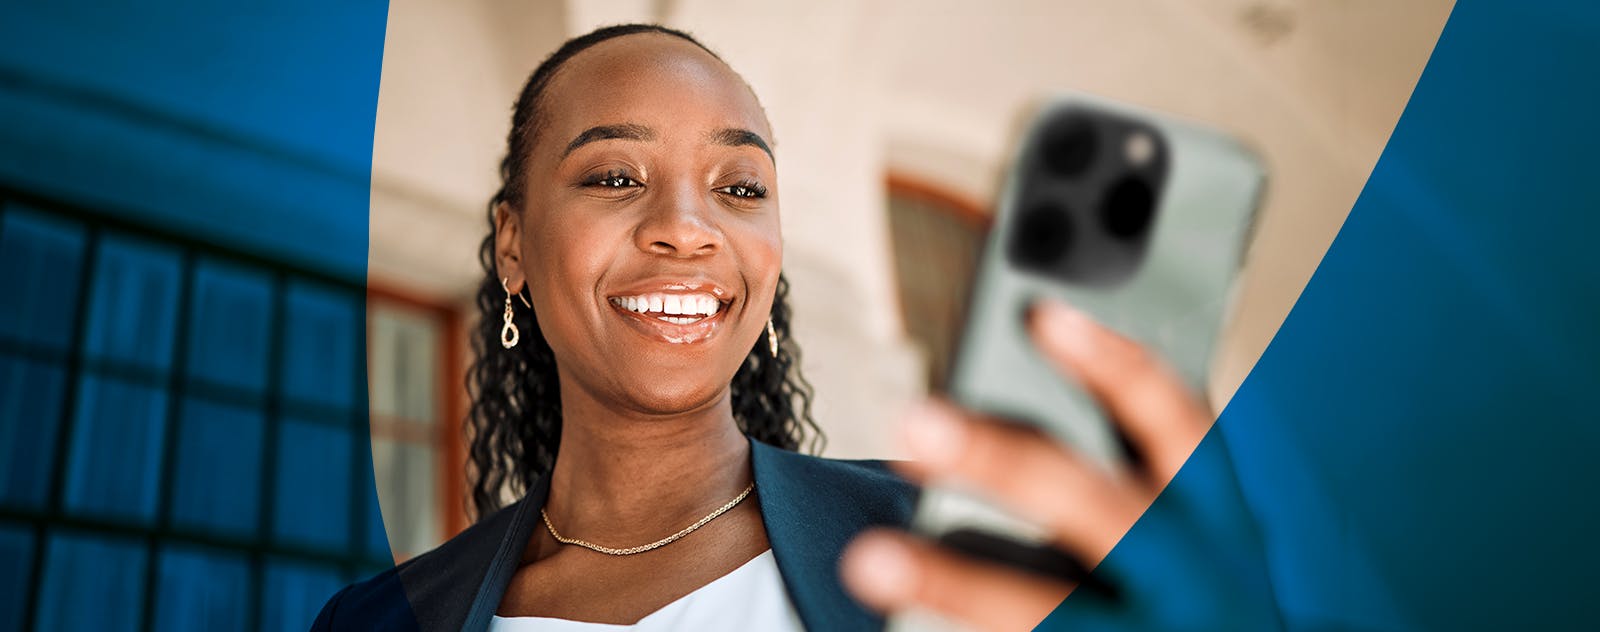 Image of a smiling woman holding a phone